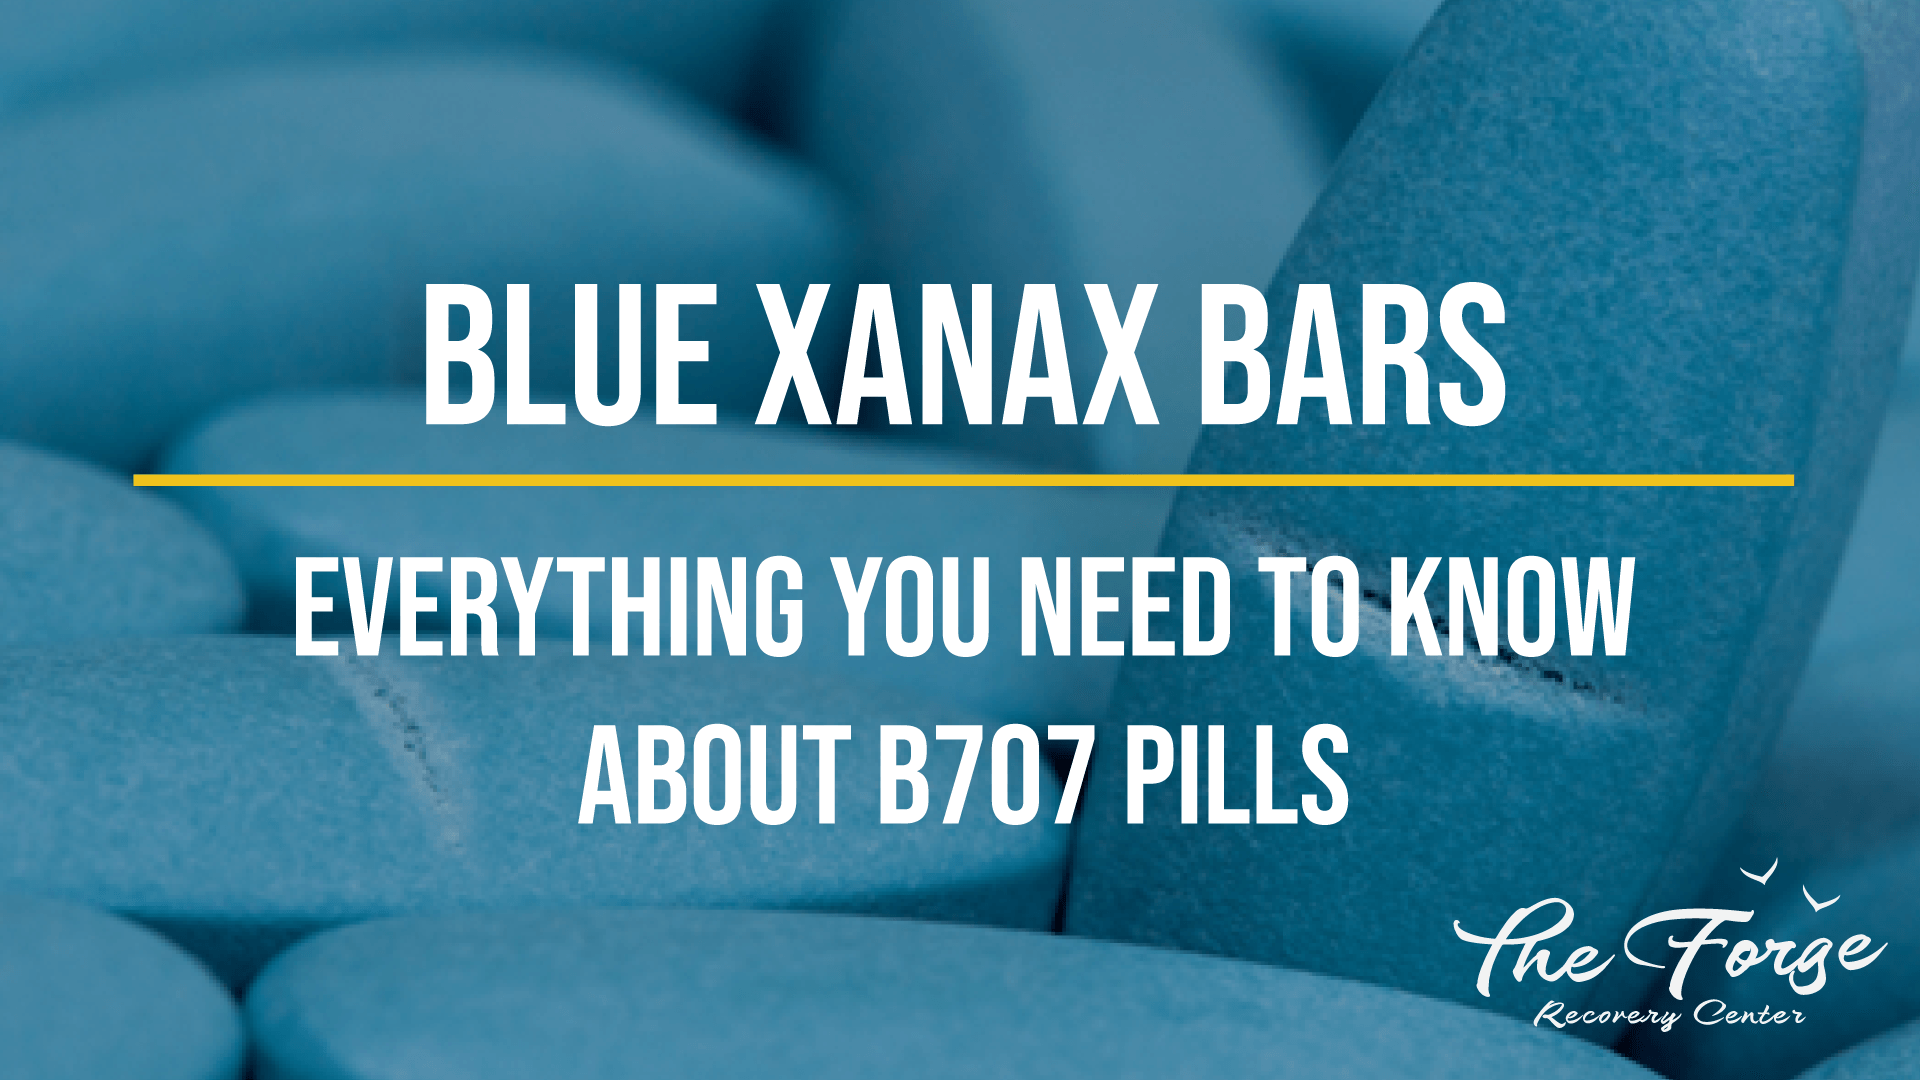 Blue Xanax Bars: Everything You Need to Know About B707 Pills